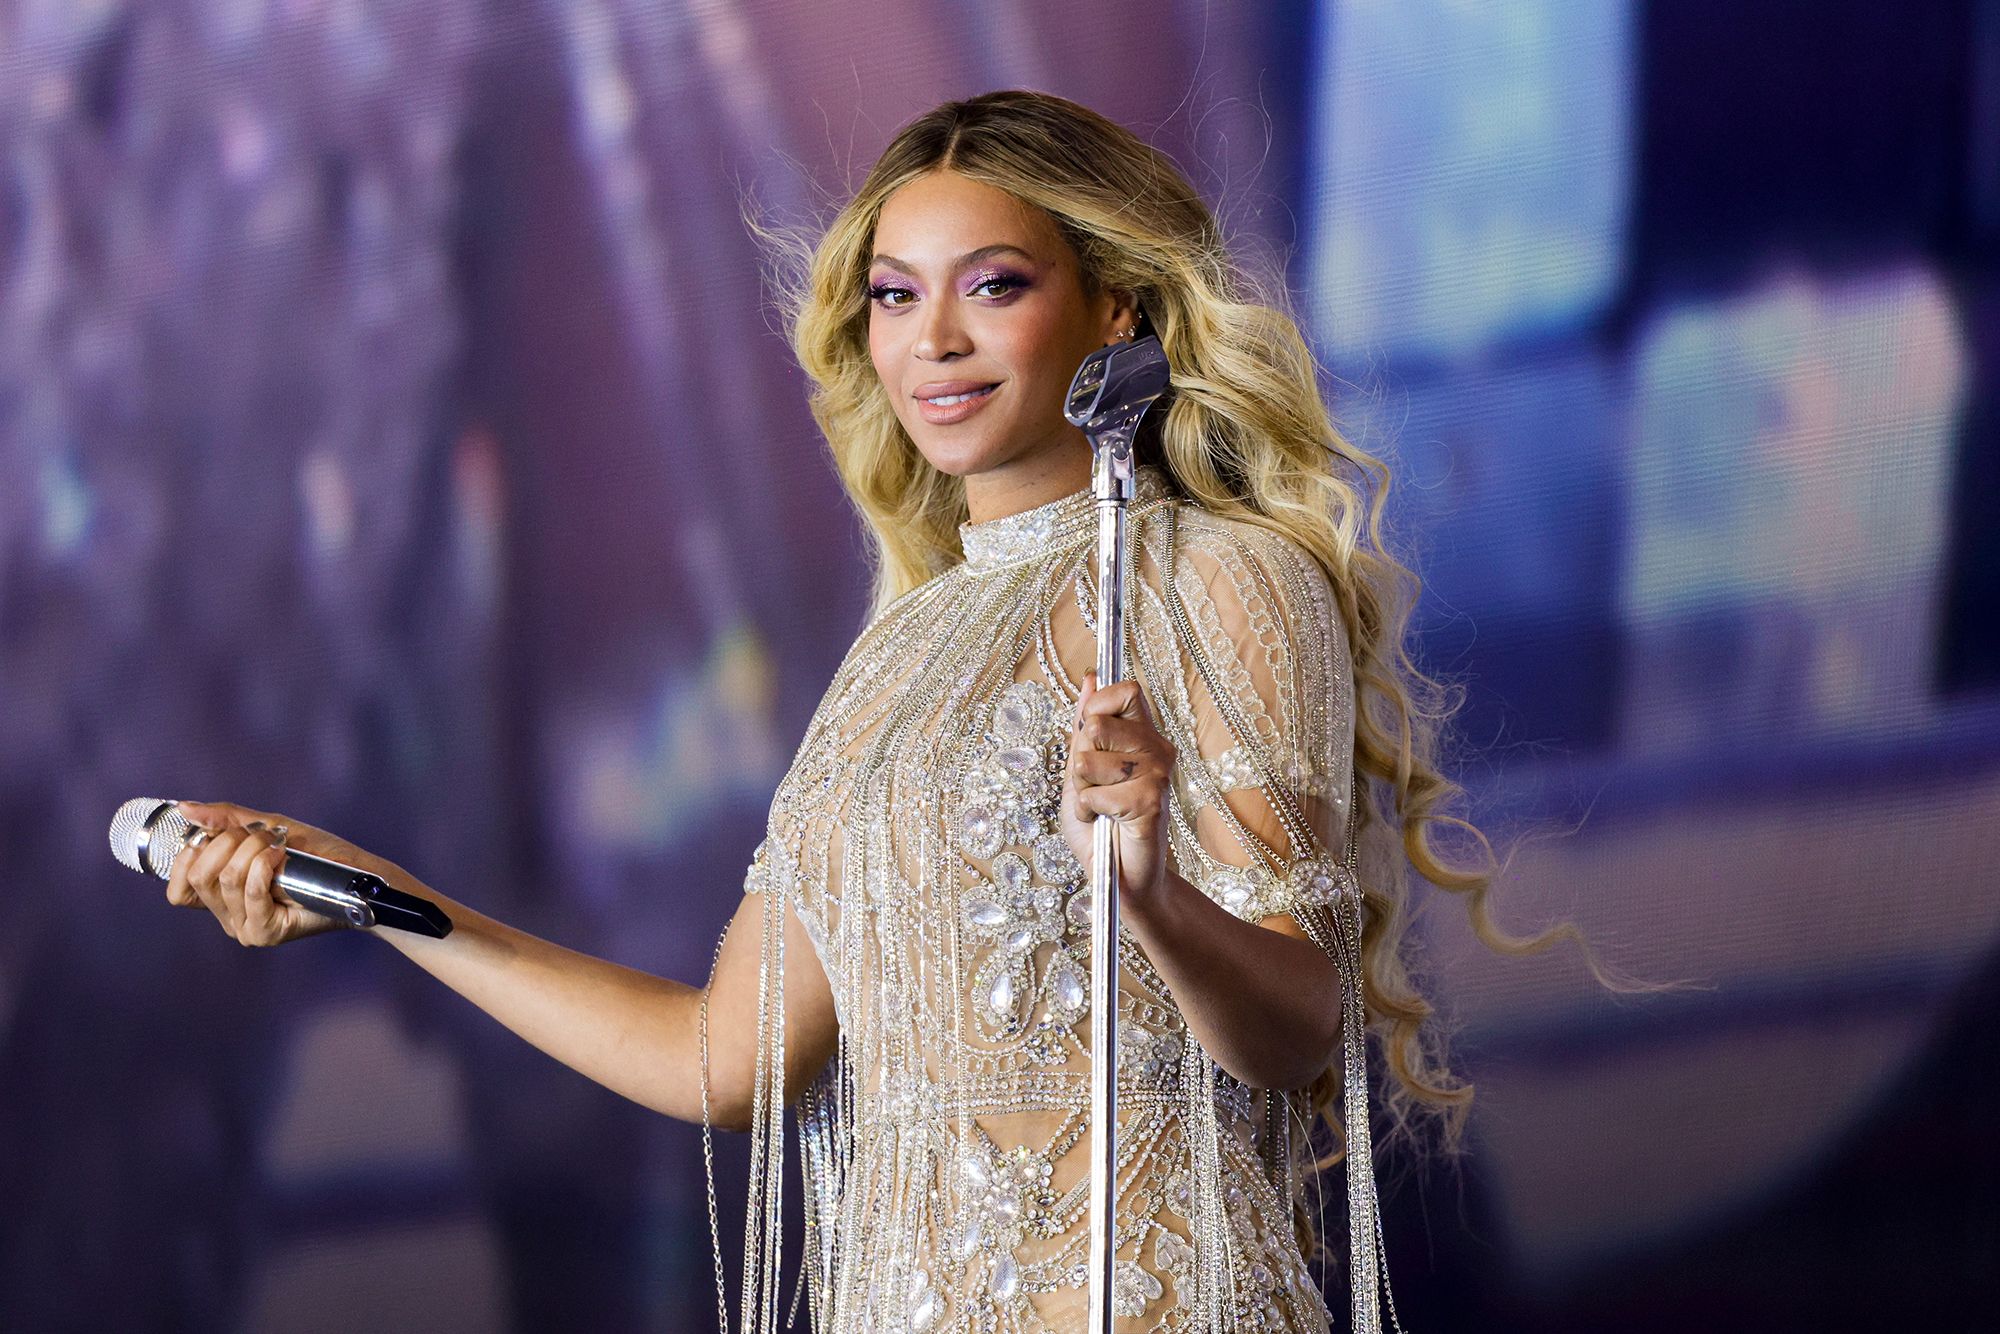 "Hair is sacred," read the announcement for Beyoncé's new product line.